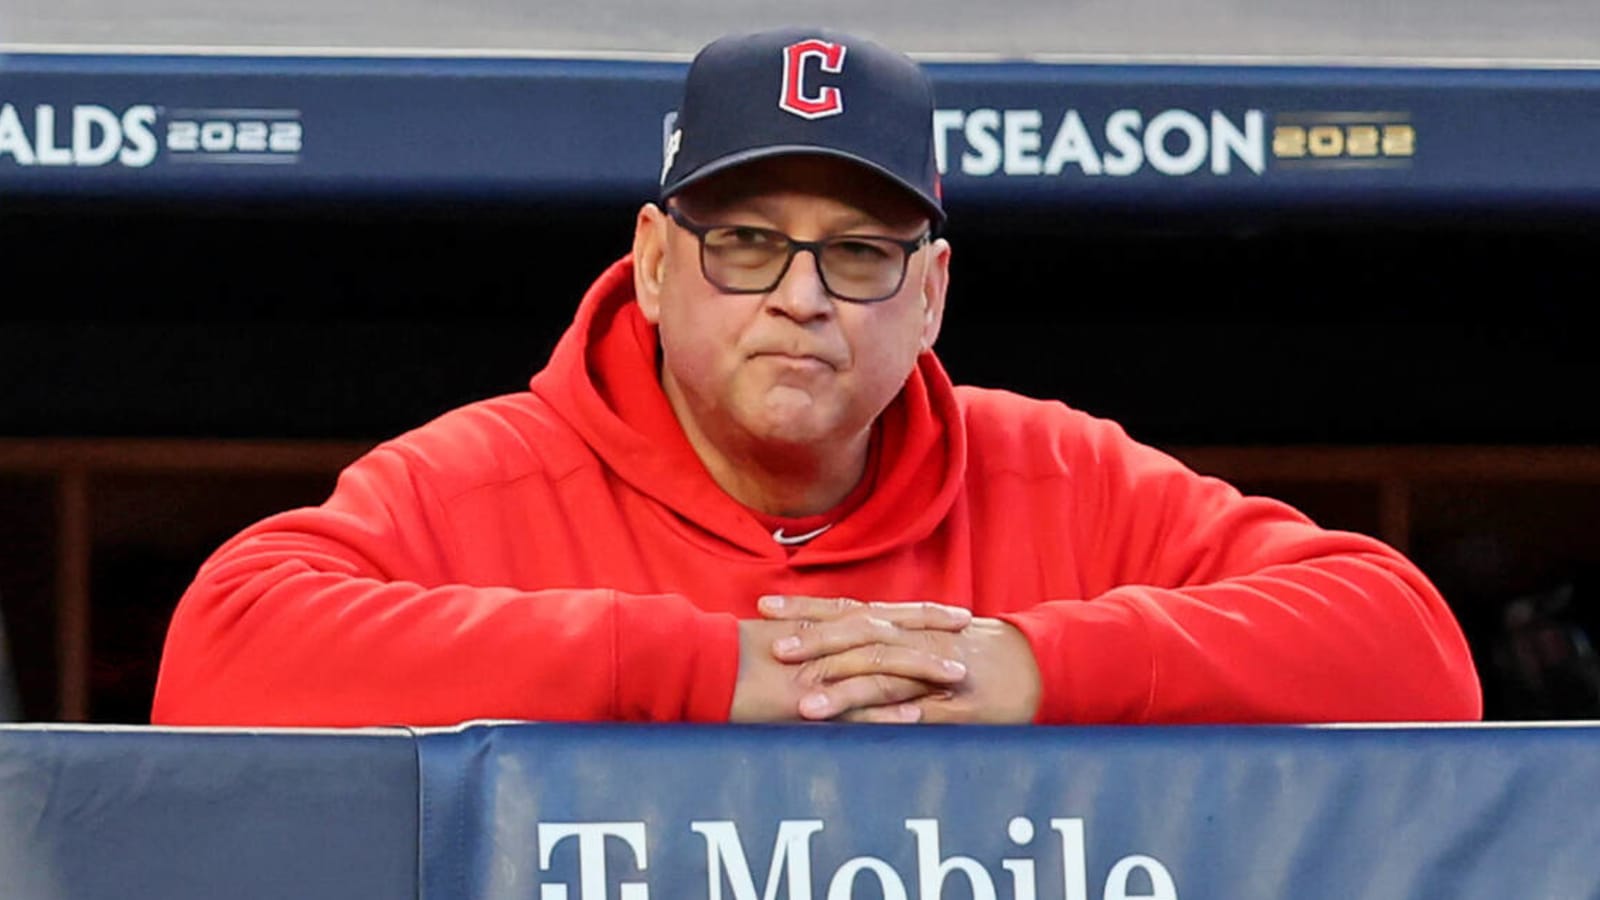 Terry Francona's scooter stolen outside his apartment